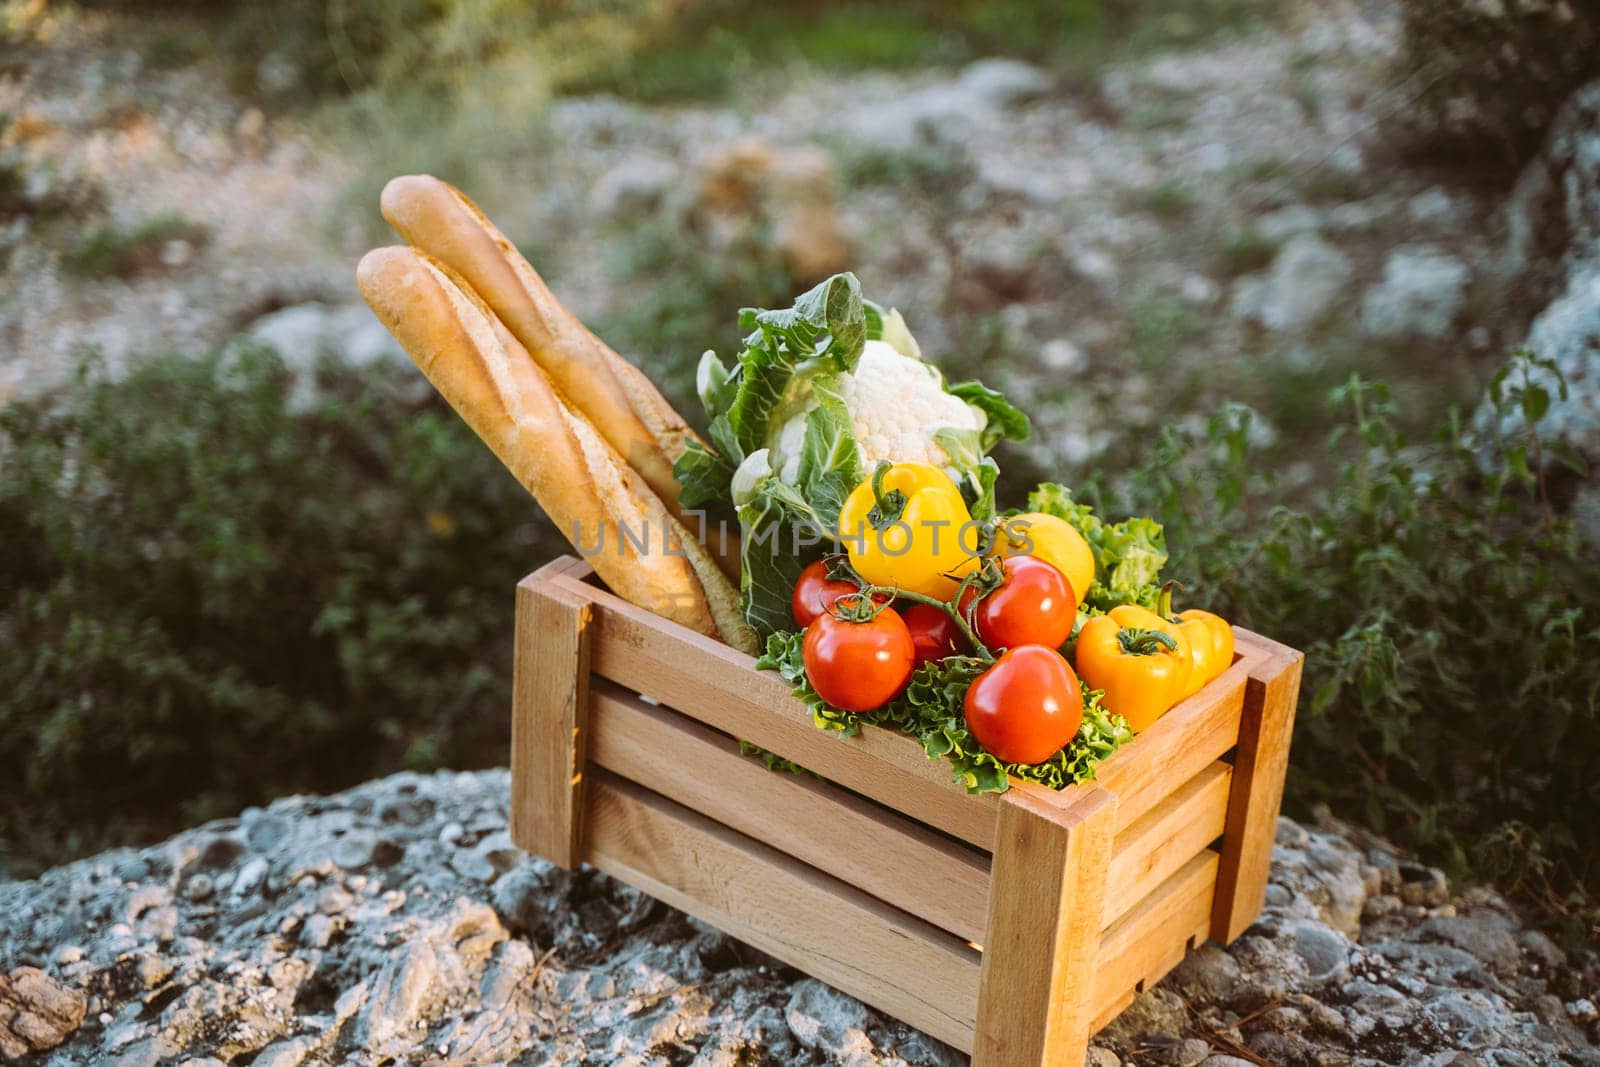 Wooden crate with farm market organic vegetables and baguettes standing on a stone. Closeup photo of frame crate with vegan food, tomatoes, bread, cauliflower, and sweet pepper